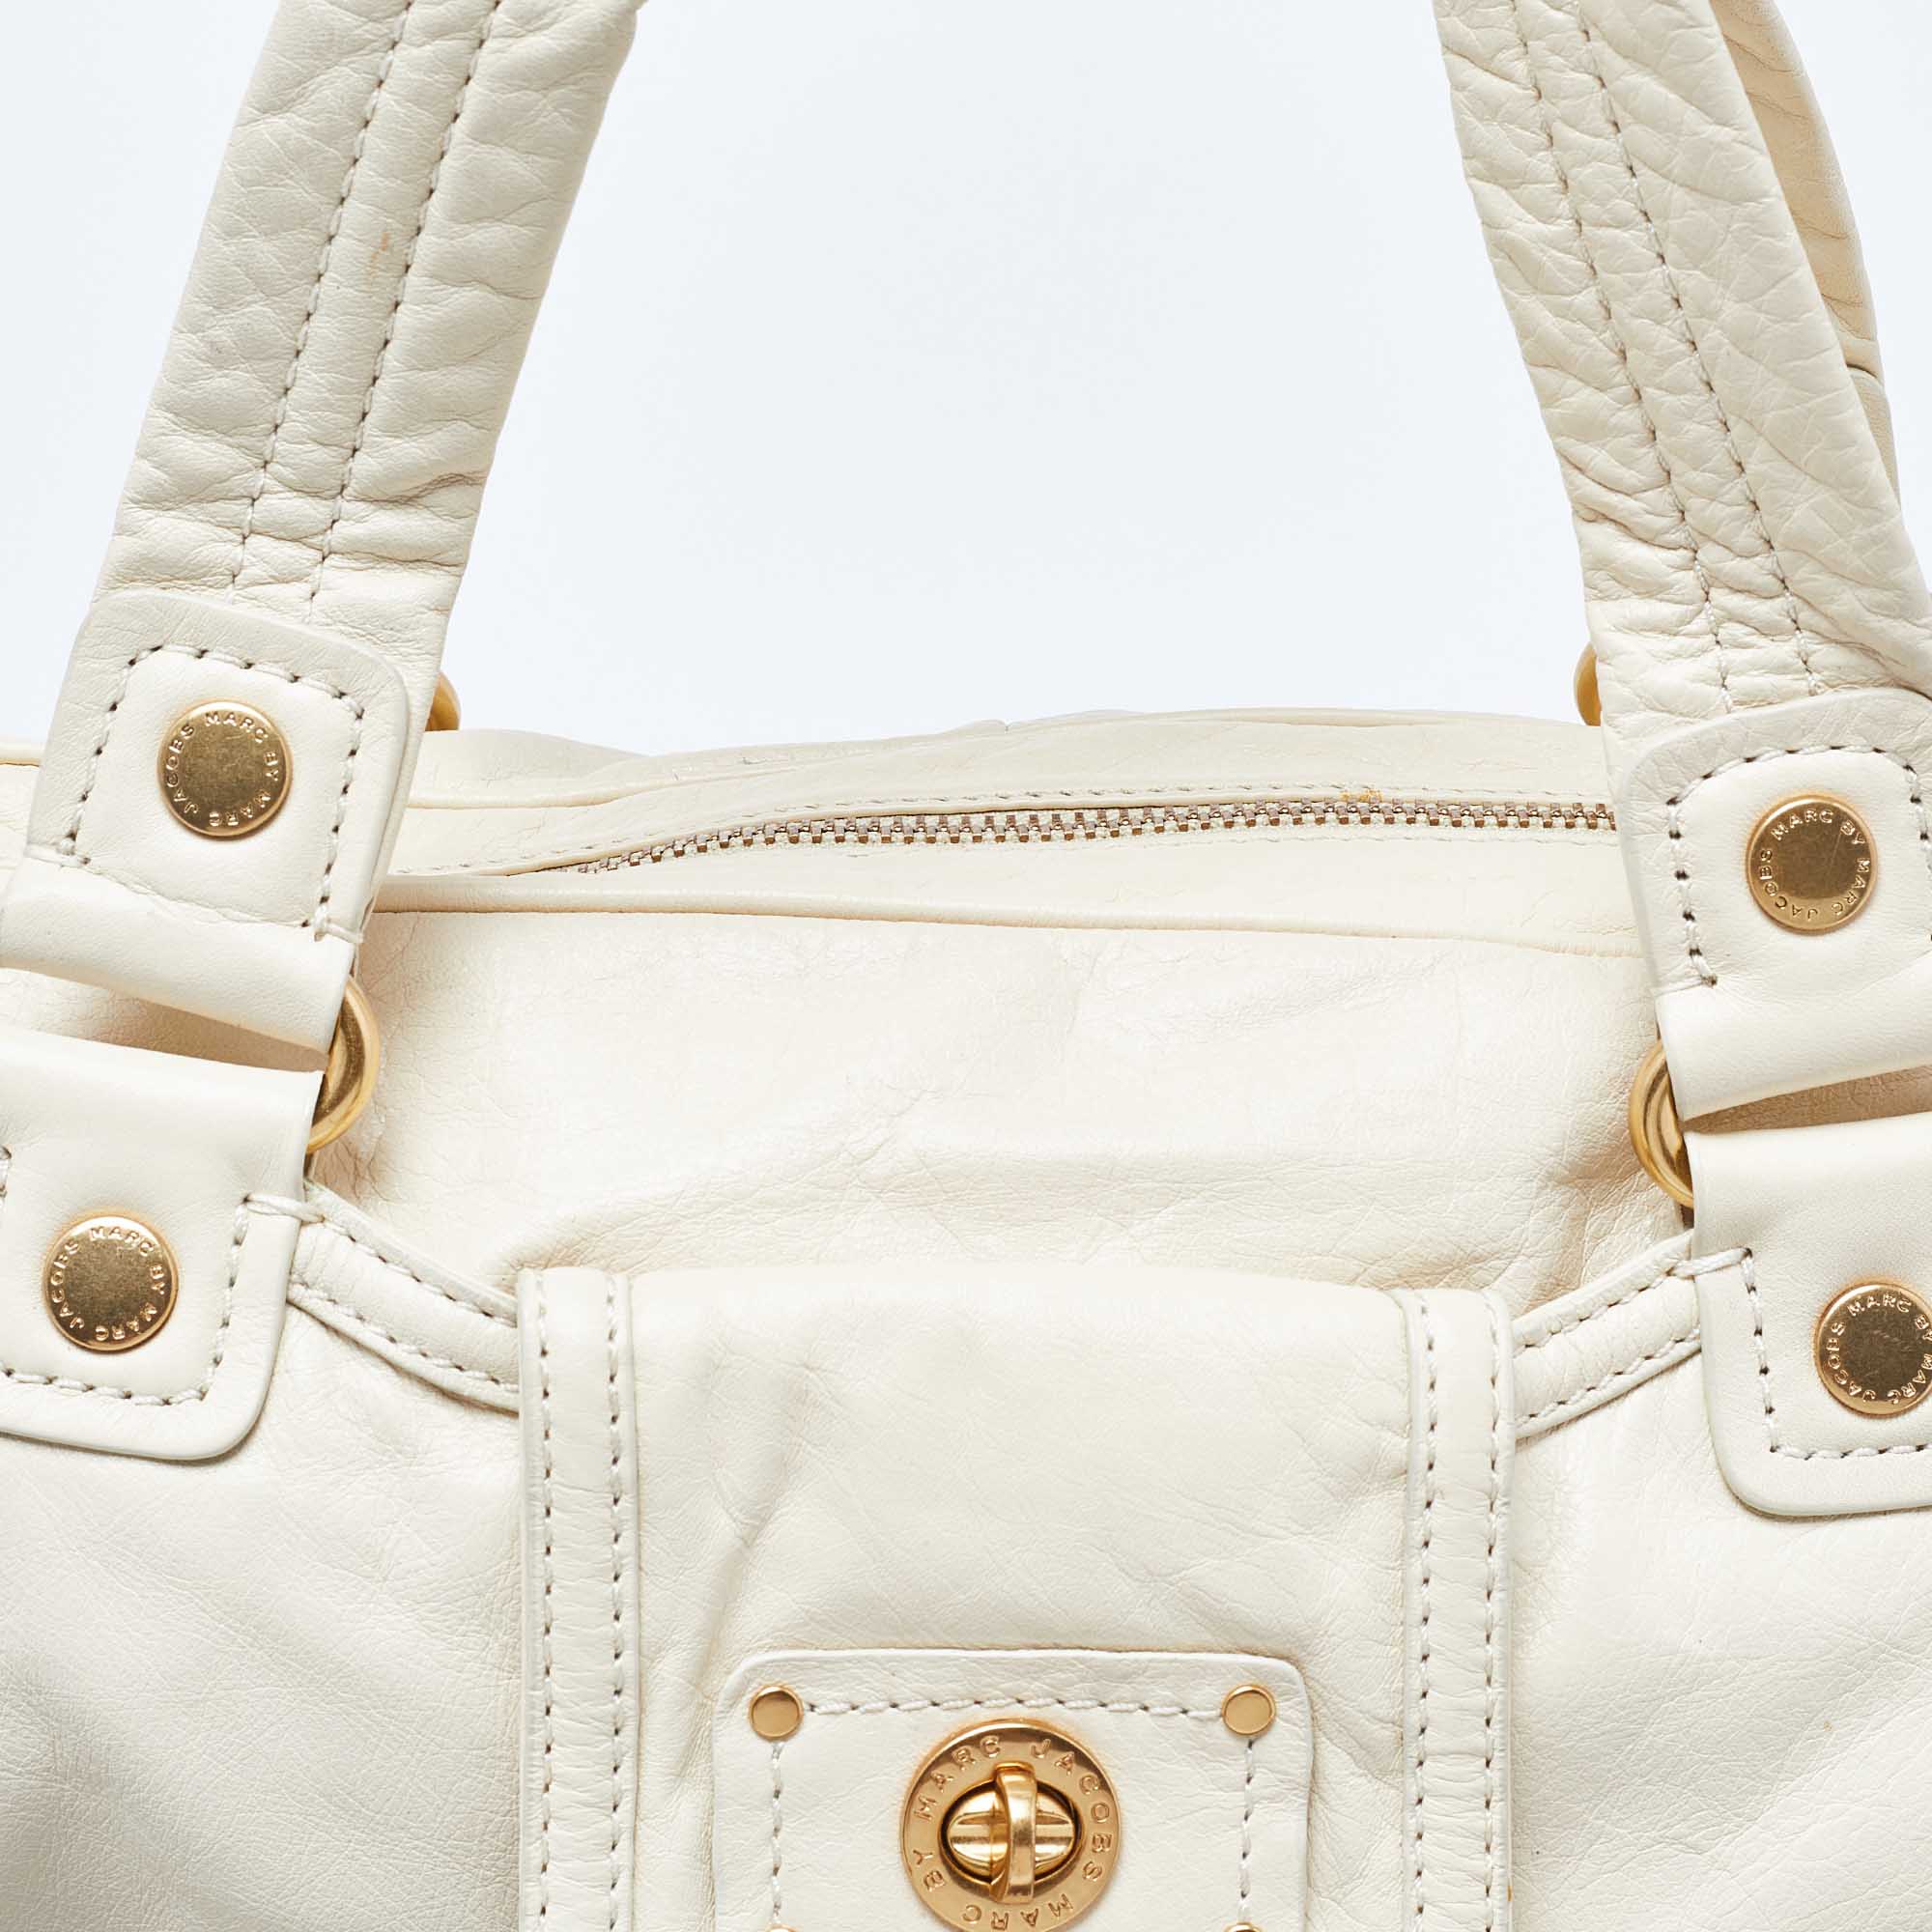 Marc Jacobs Off White Leather Satchel